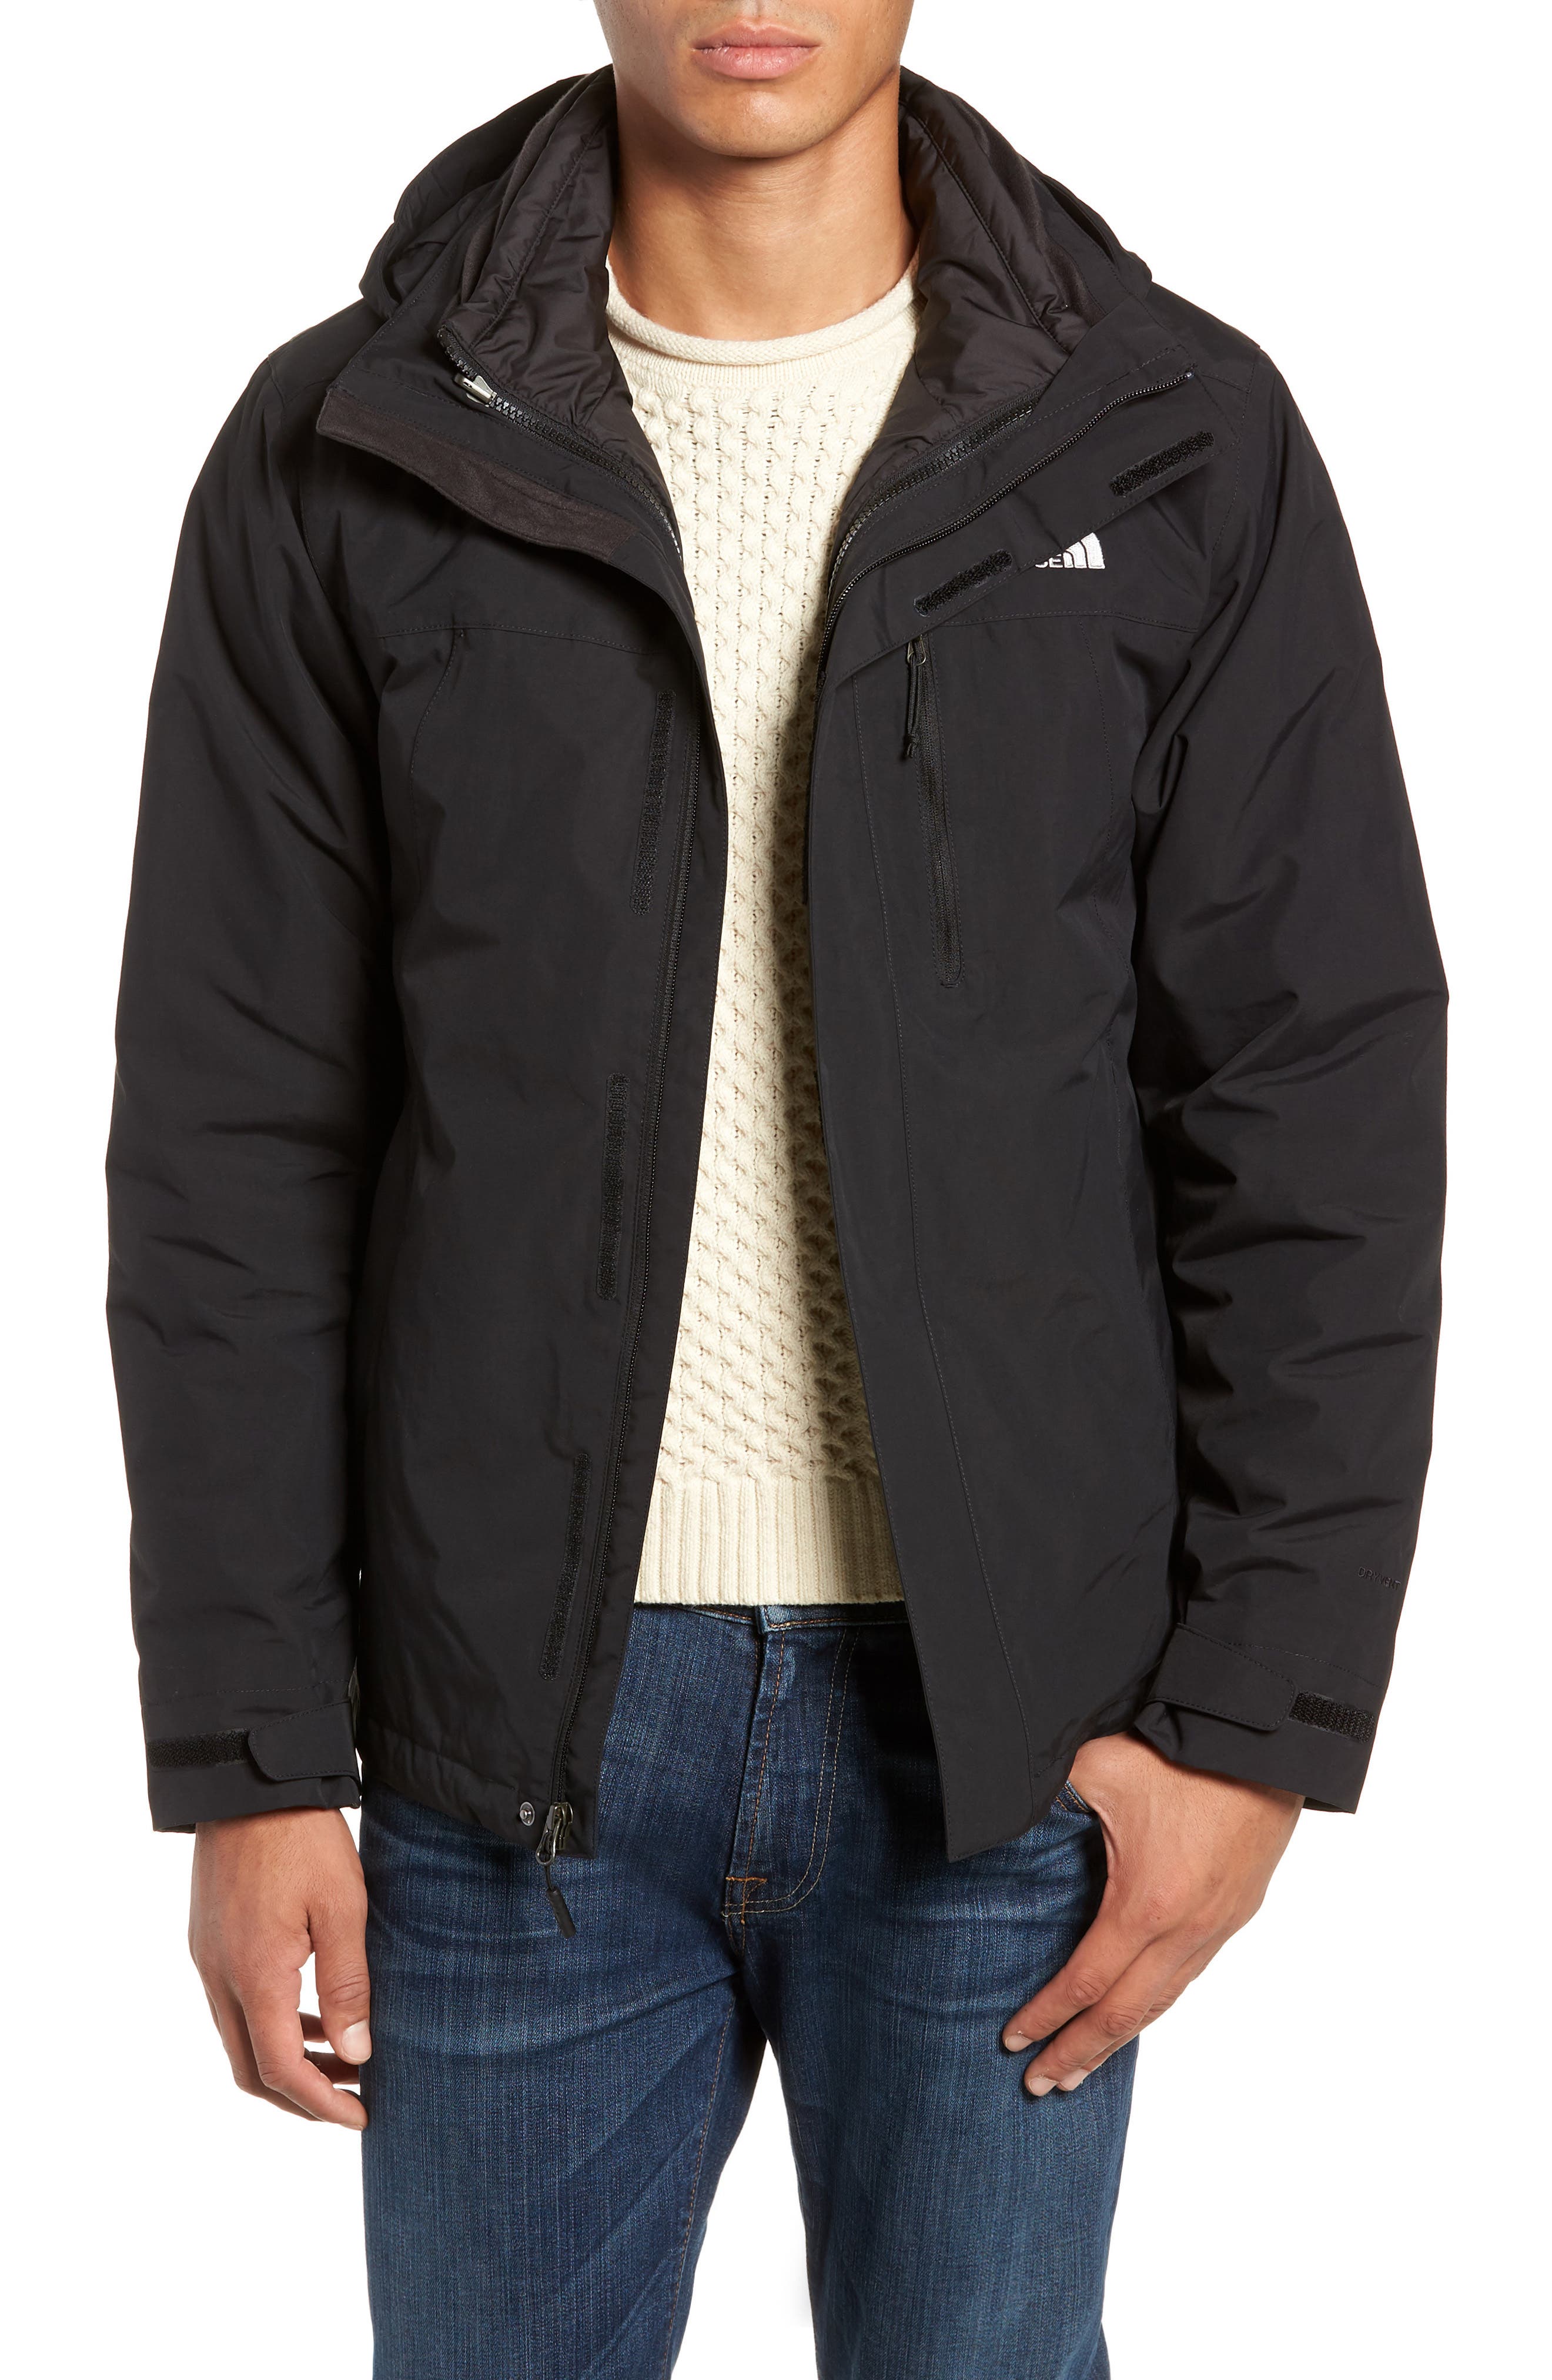 the north face men's carto triclimate